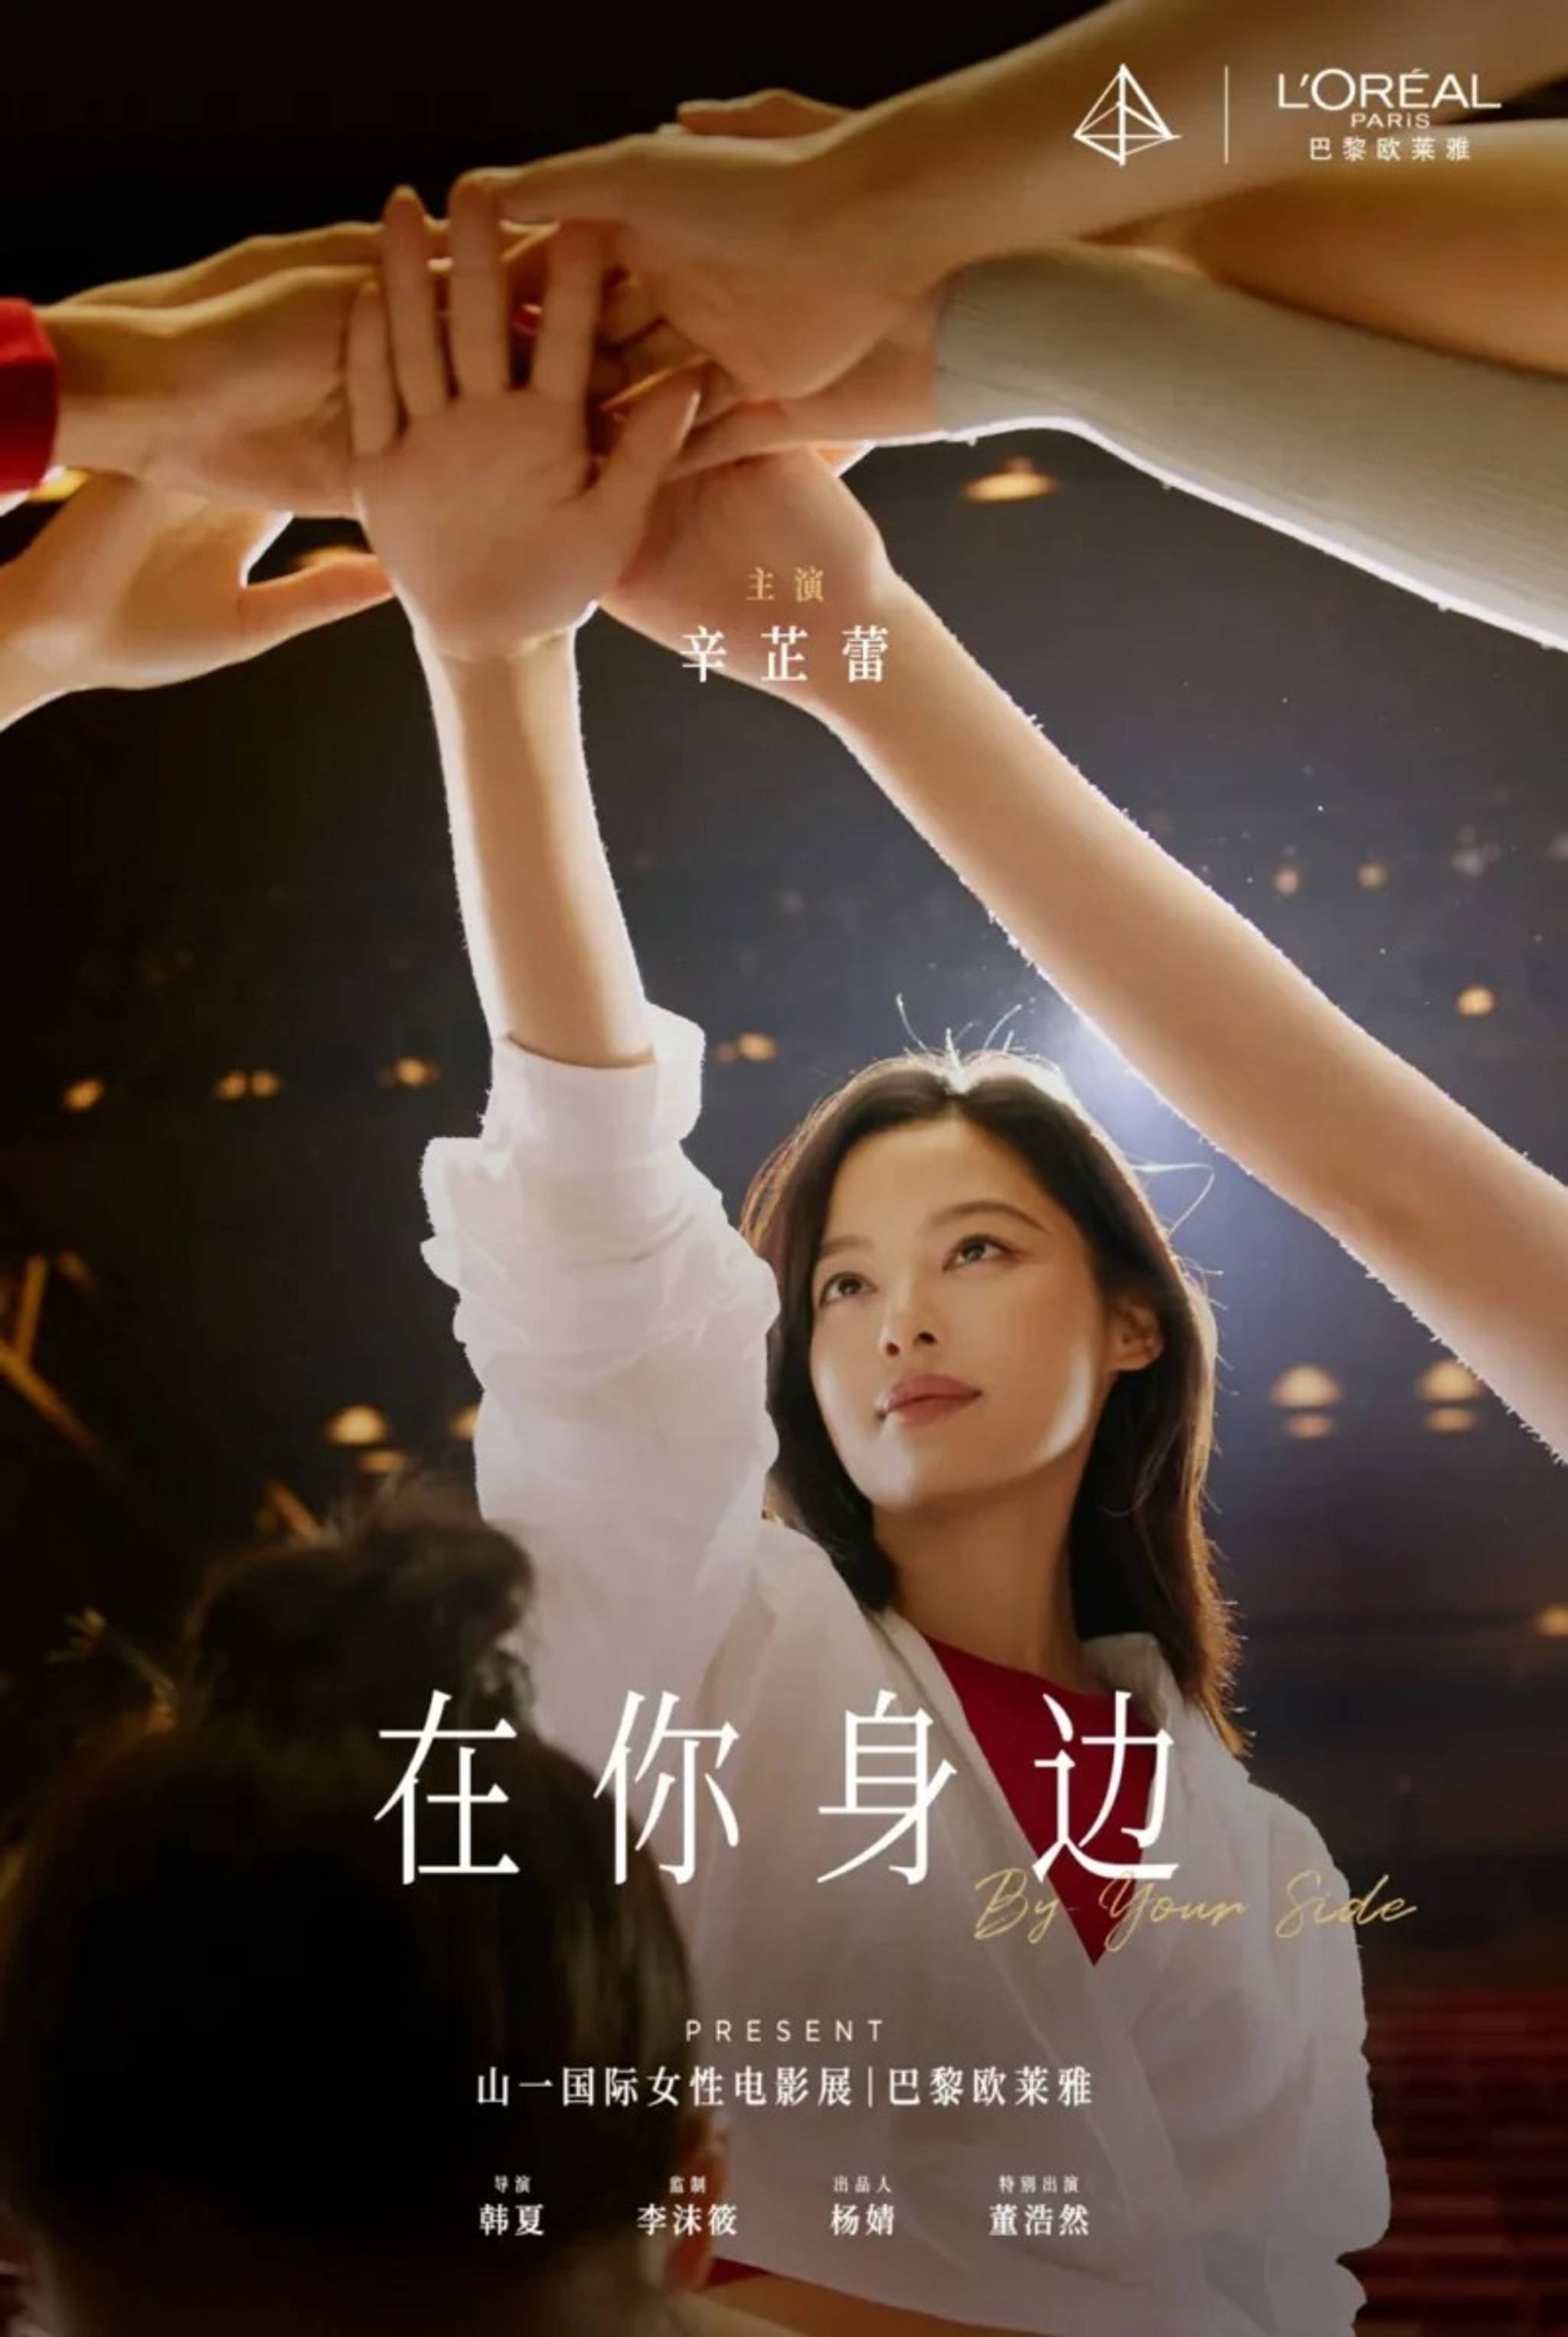 L'Oreal campaign tackles sexual harassment in China